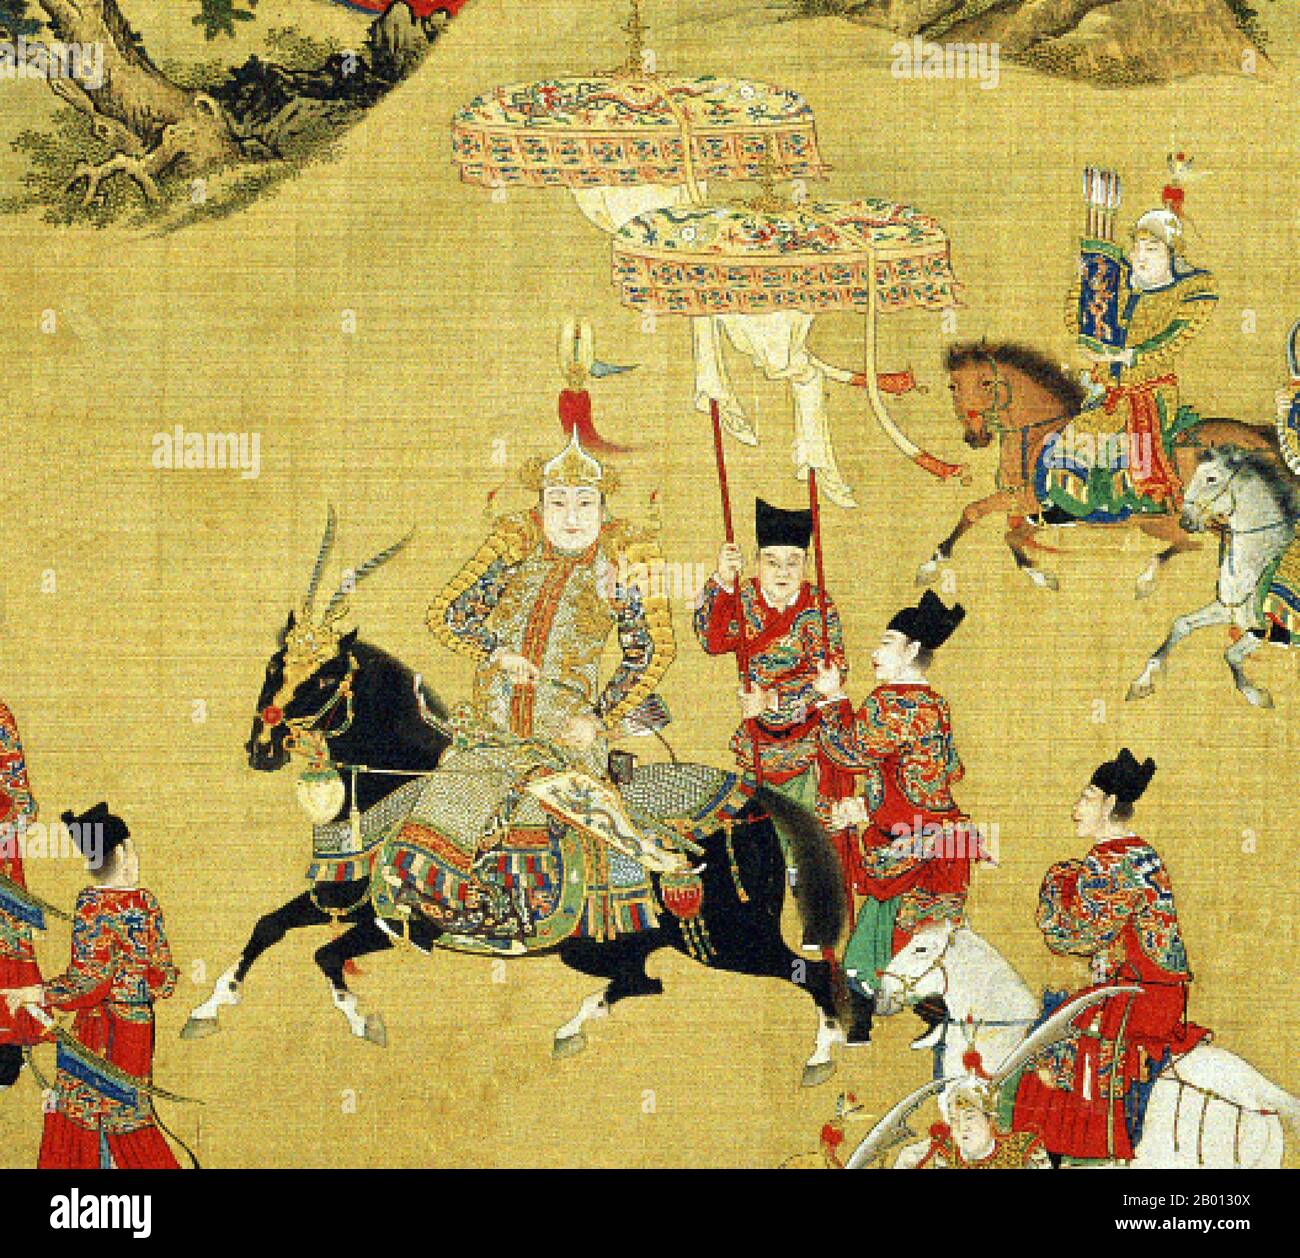 China: 'The Emperor's Approach'. Detail of silk handscroll painting, c. 1425-1435.  A panoramic handscroll painting showing the Chinese Xuande Emperor (r. 1425-1435) traveling to the Ming Dynasty Tombs with a huge cavalry escort and an elephant-driven carriage. The Xuande Emperor was portrayed in contemporary court portrait paintings; the Xuande Emperor can be seen in the right half riding a black steed and wearing a plumed helmet. He is distinguished from his entourage of bodyguards as an abnormally tall figure. Stock Photo